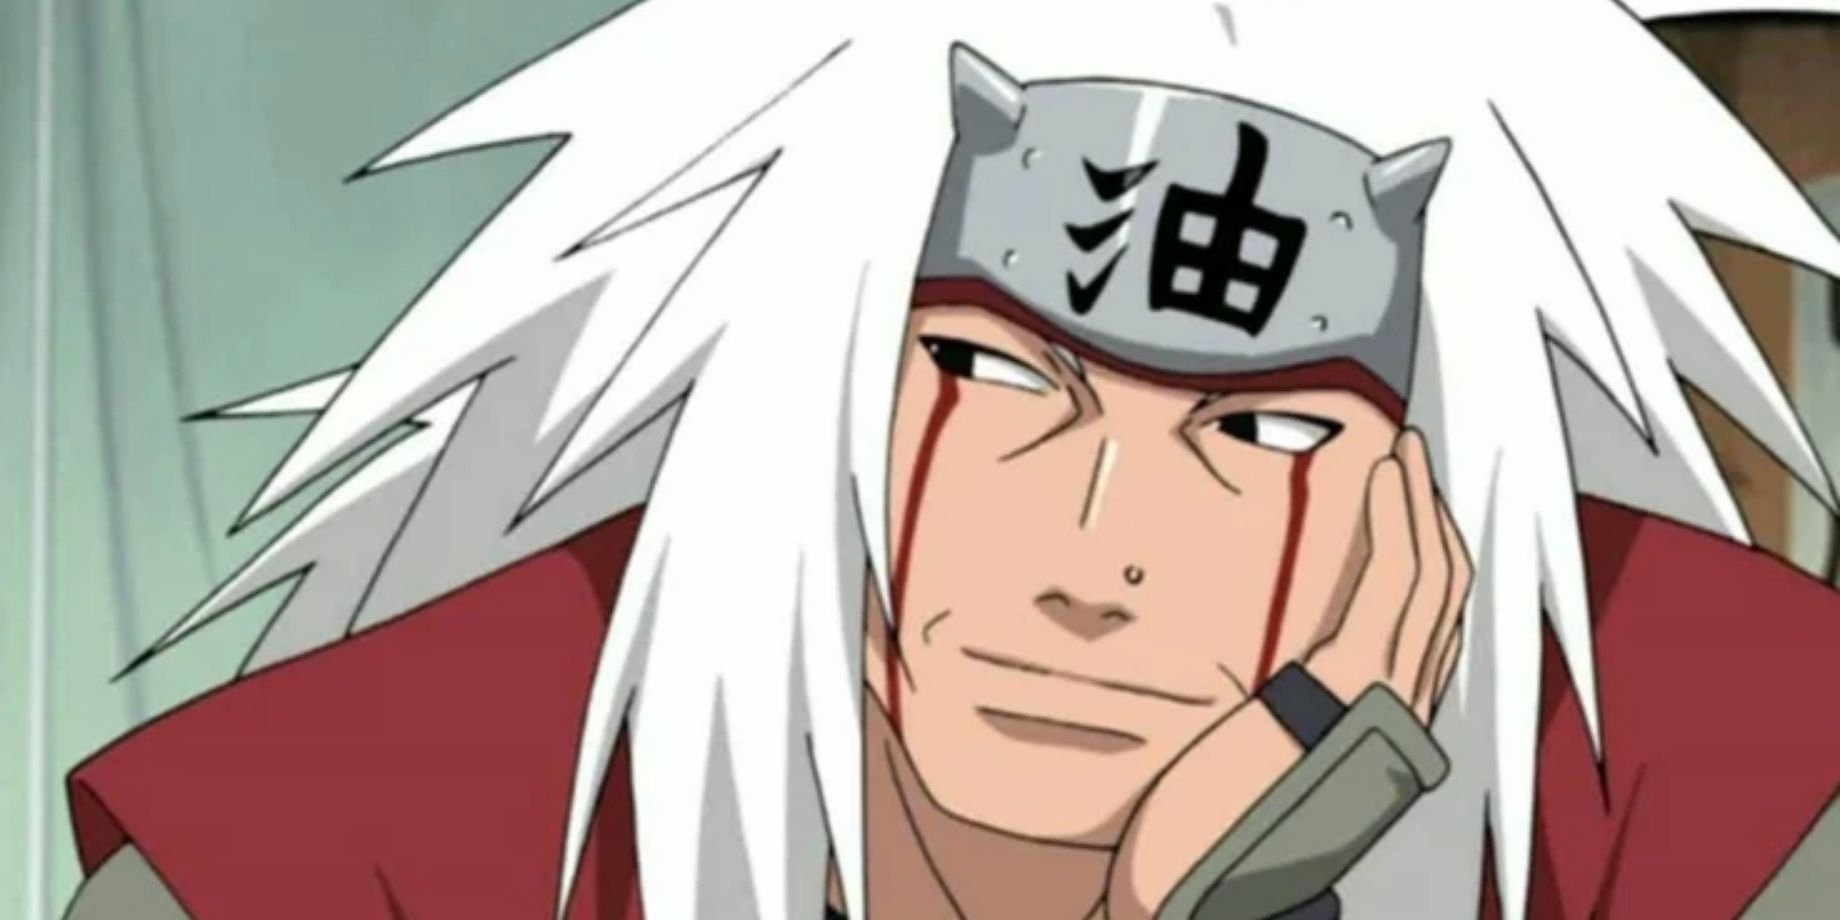 Jiraiya sits at a table in thought in Naruto